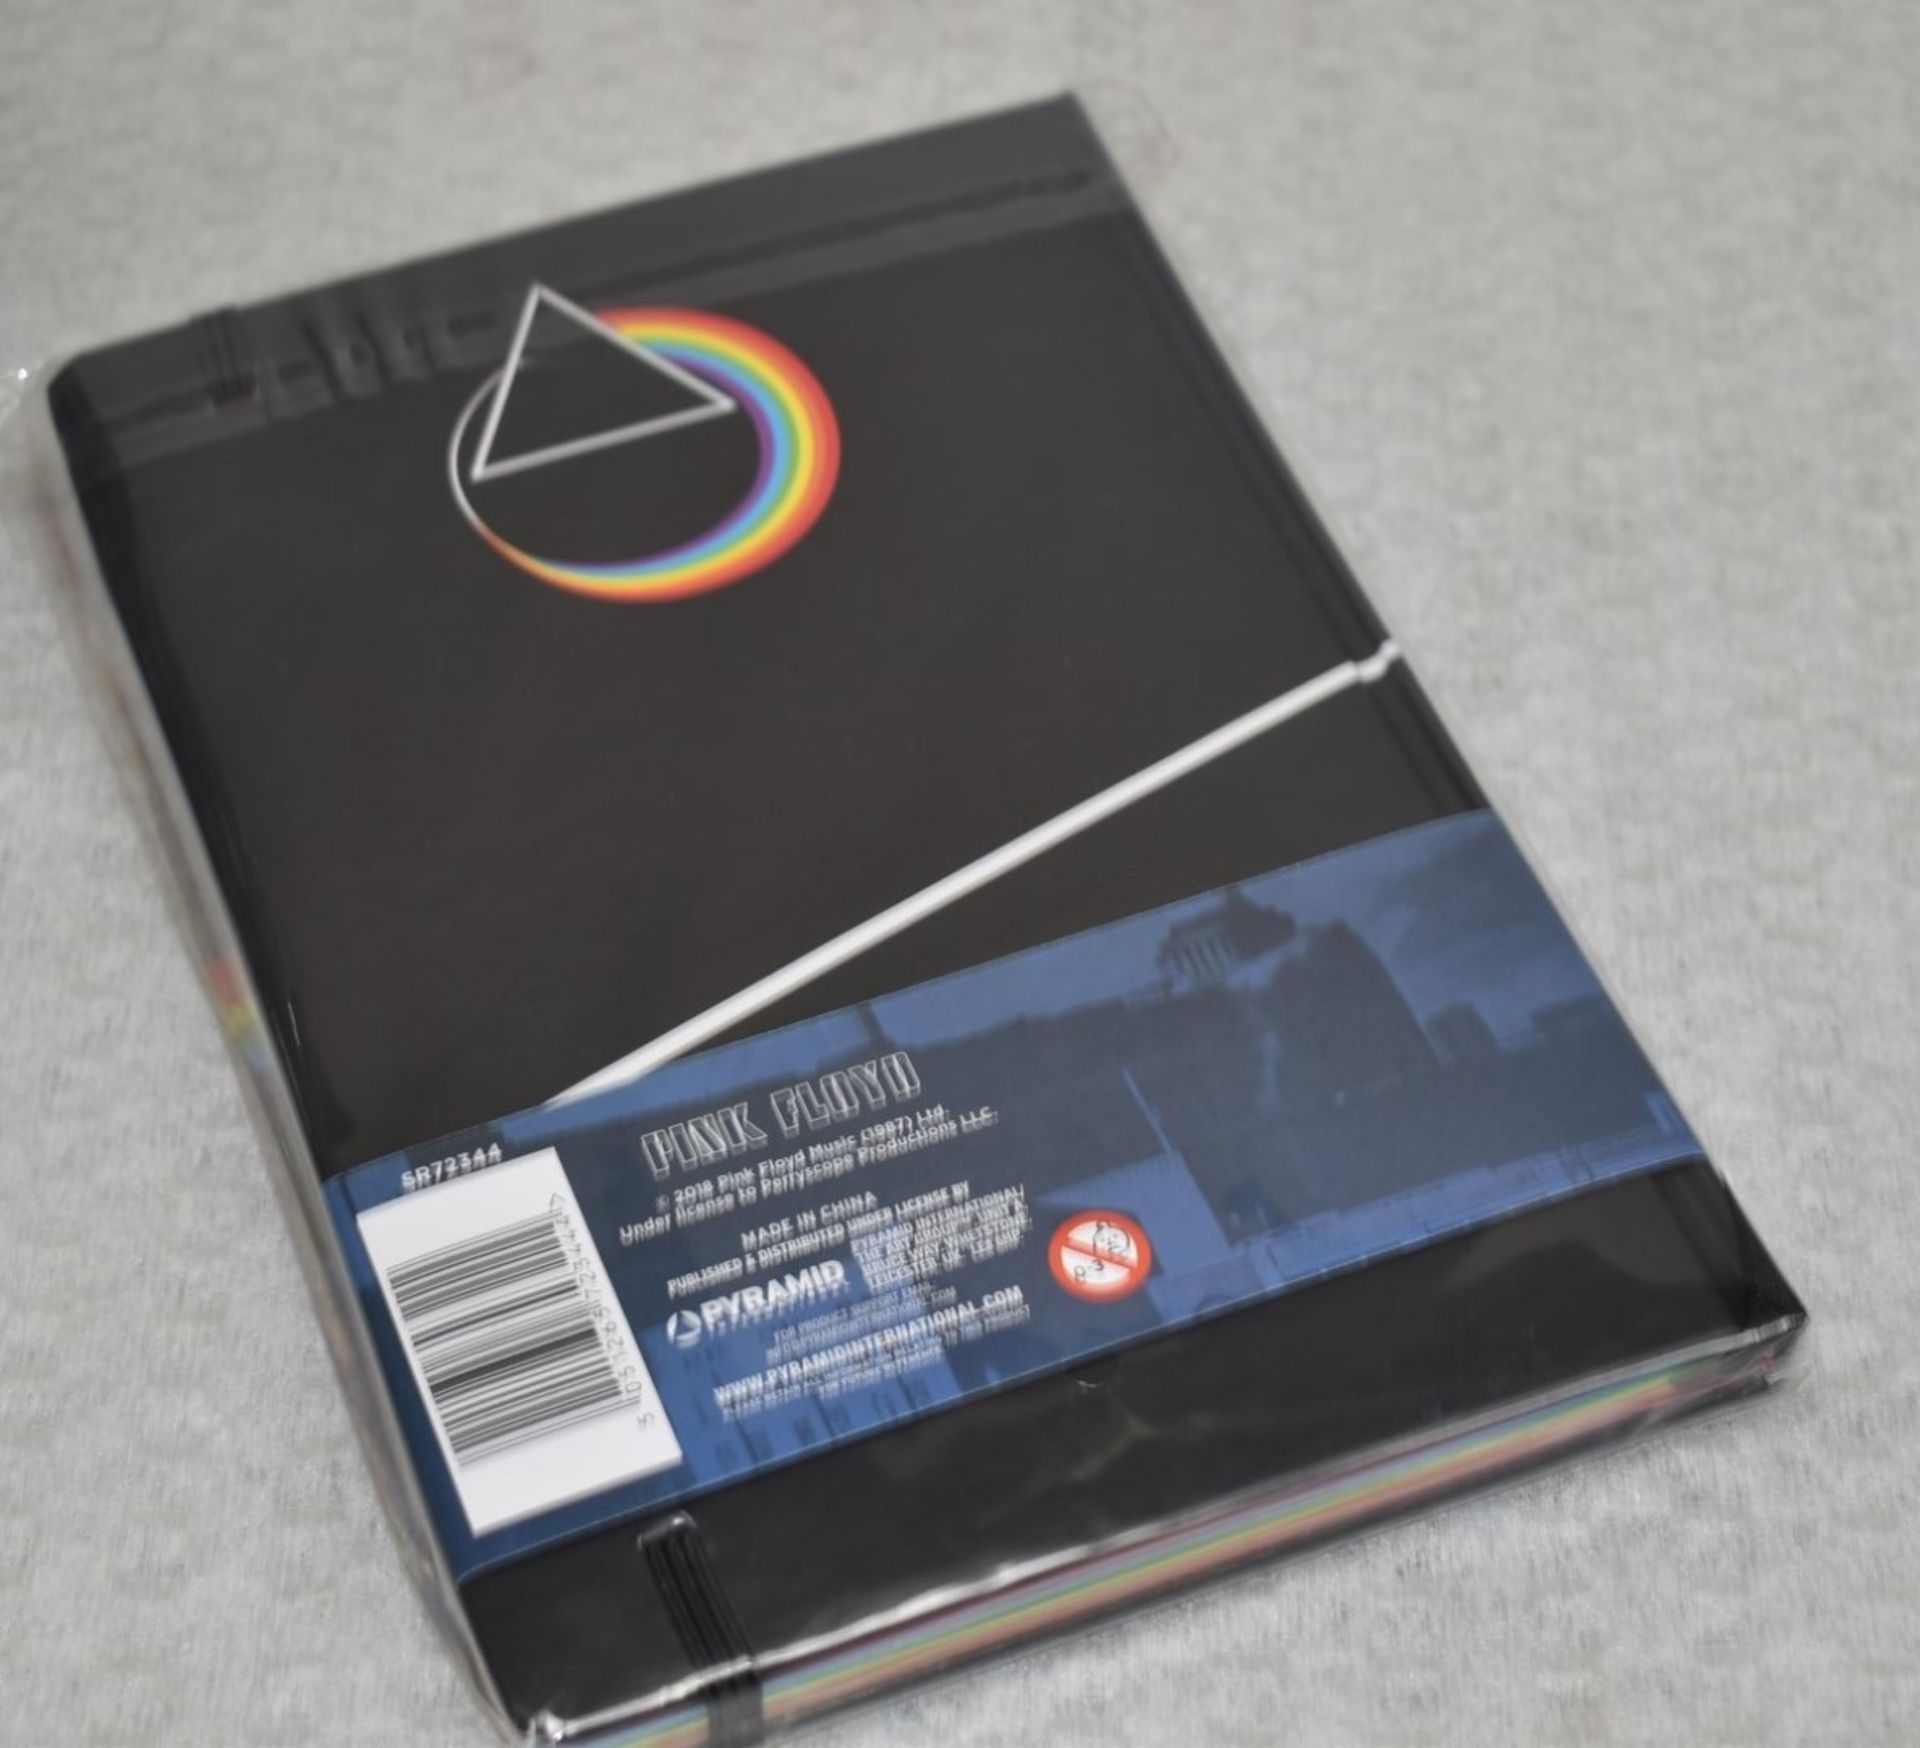 1 x Pink Floyd Premium A5 Notebook - Officially Licensed Merchandise - New & Unused - Ref: RR946 - Image 7 of 8